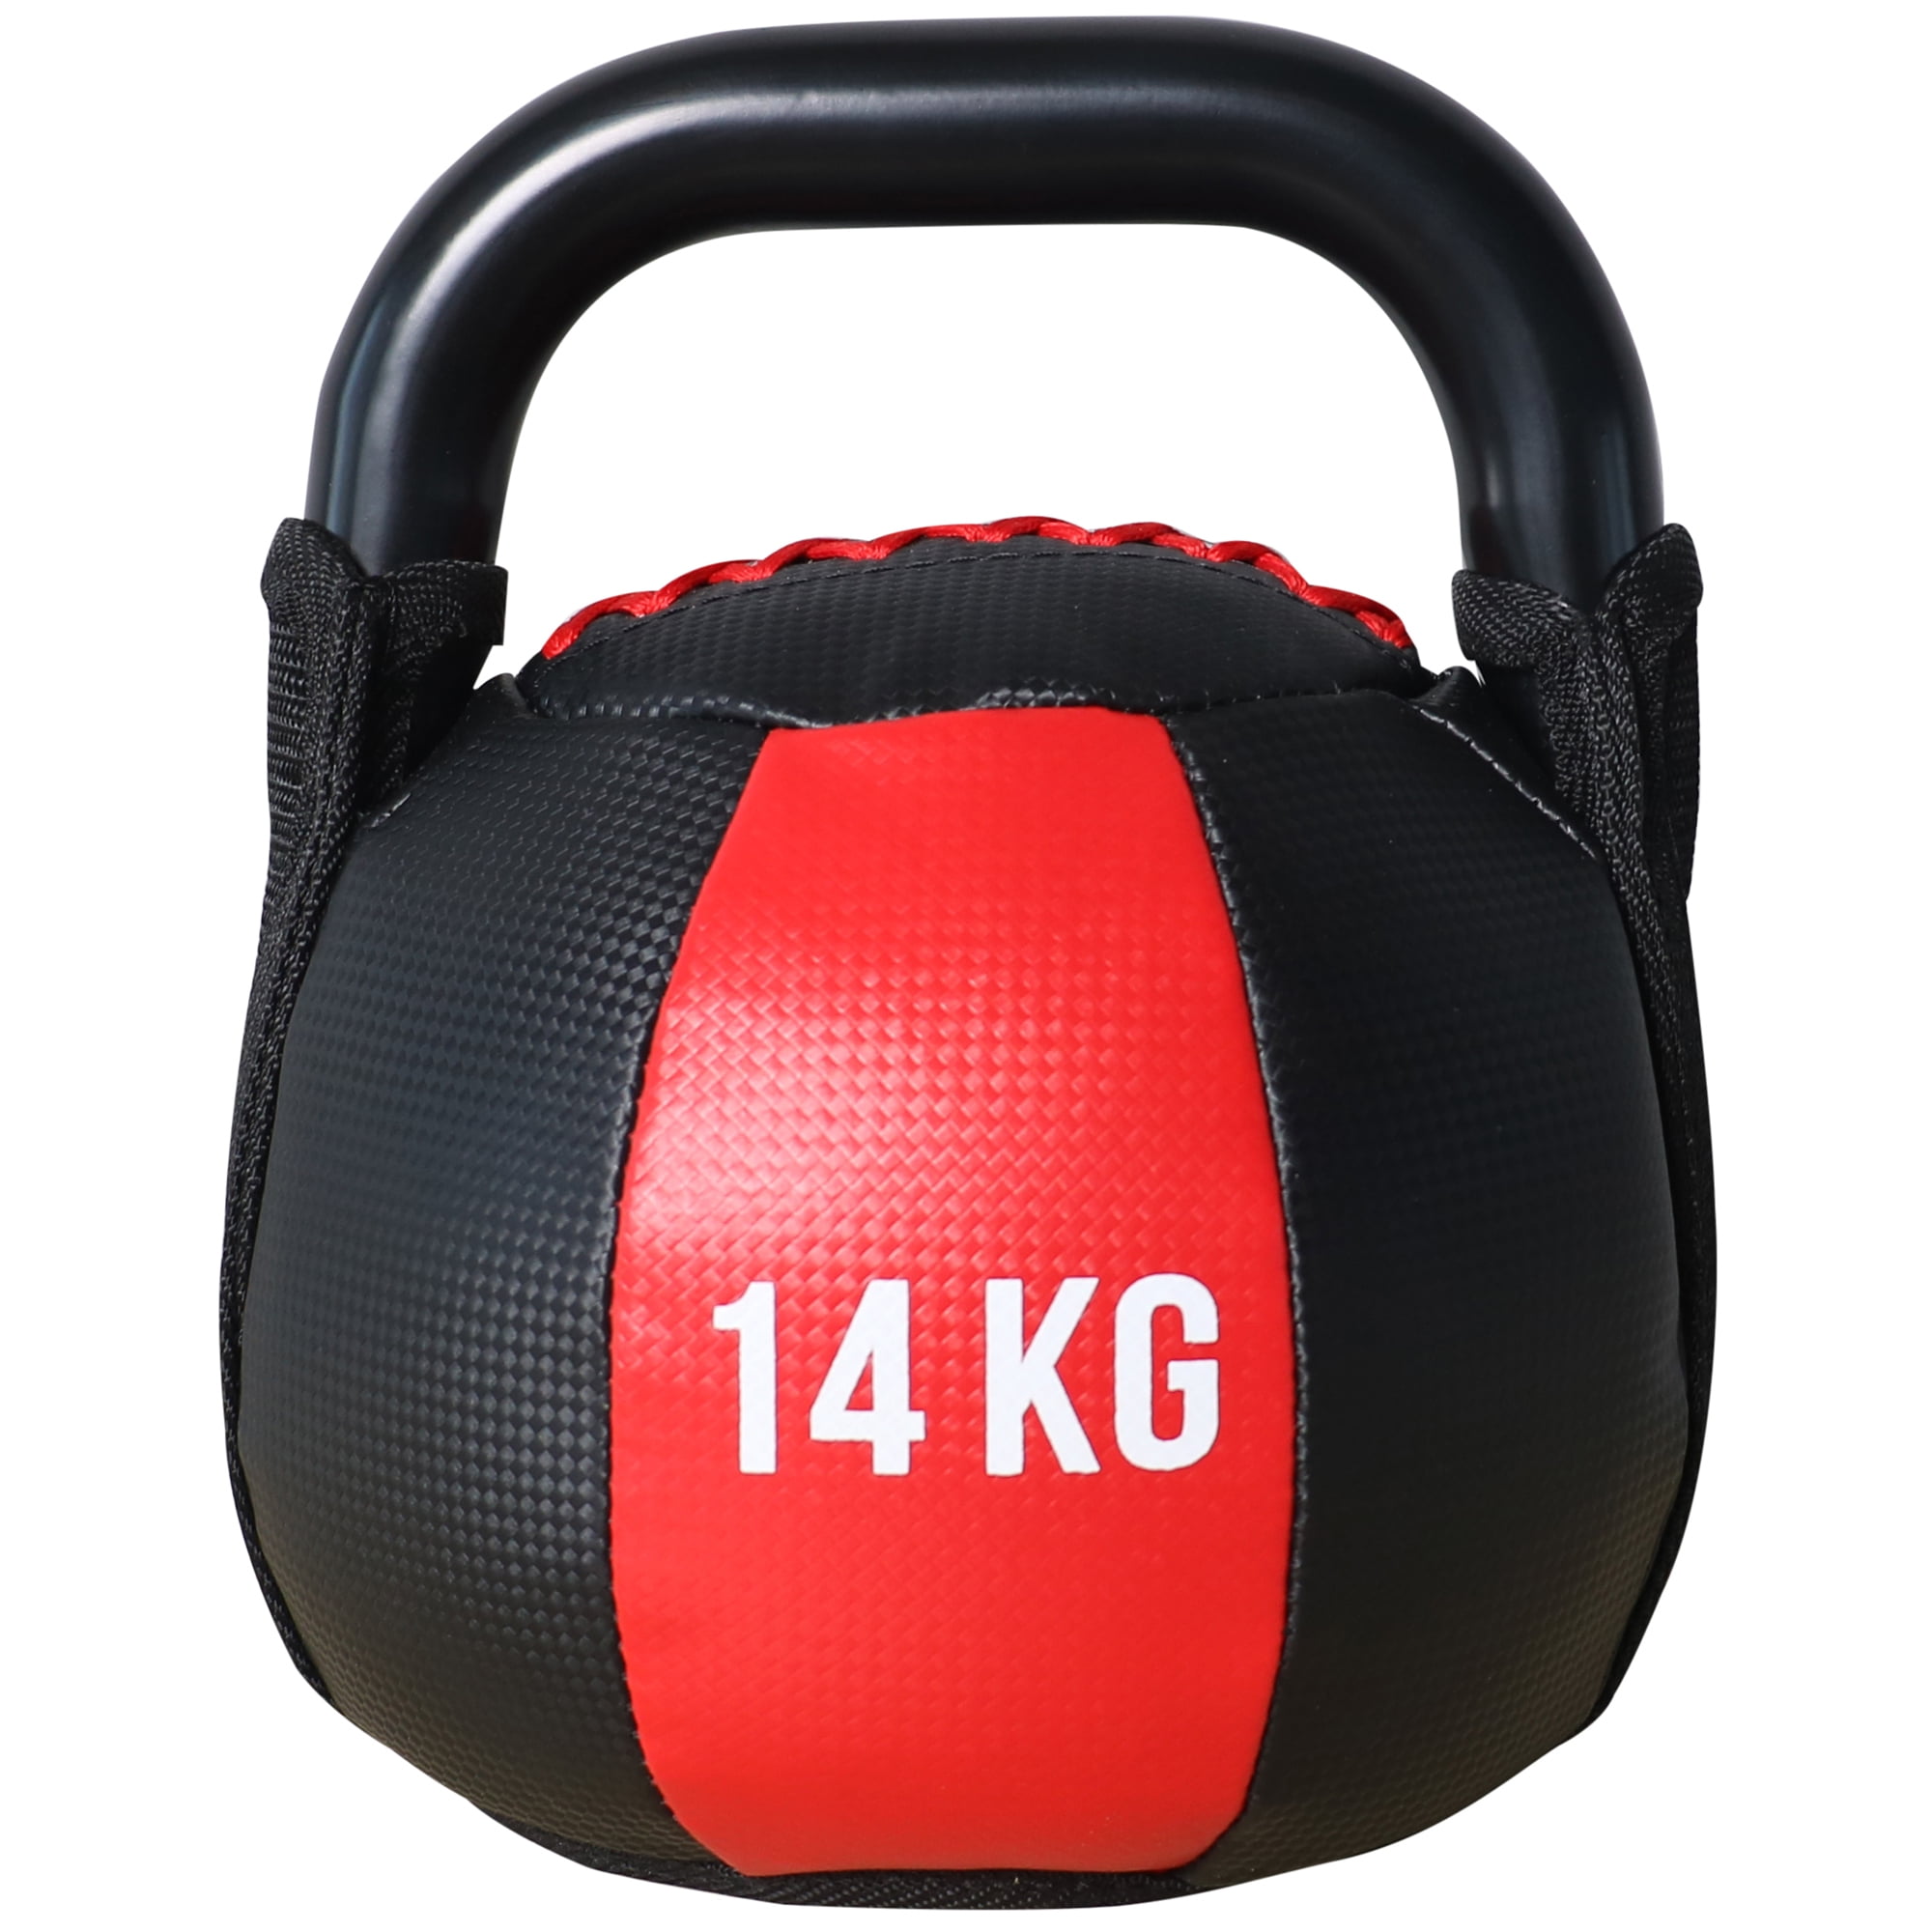 Prisp Soft Kettlebell Workout Weight - Sand-Filled Bell Body with Rigid Handle, 6kg